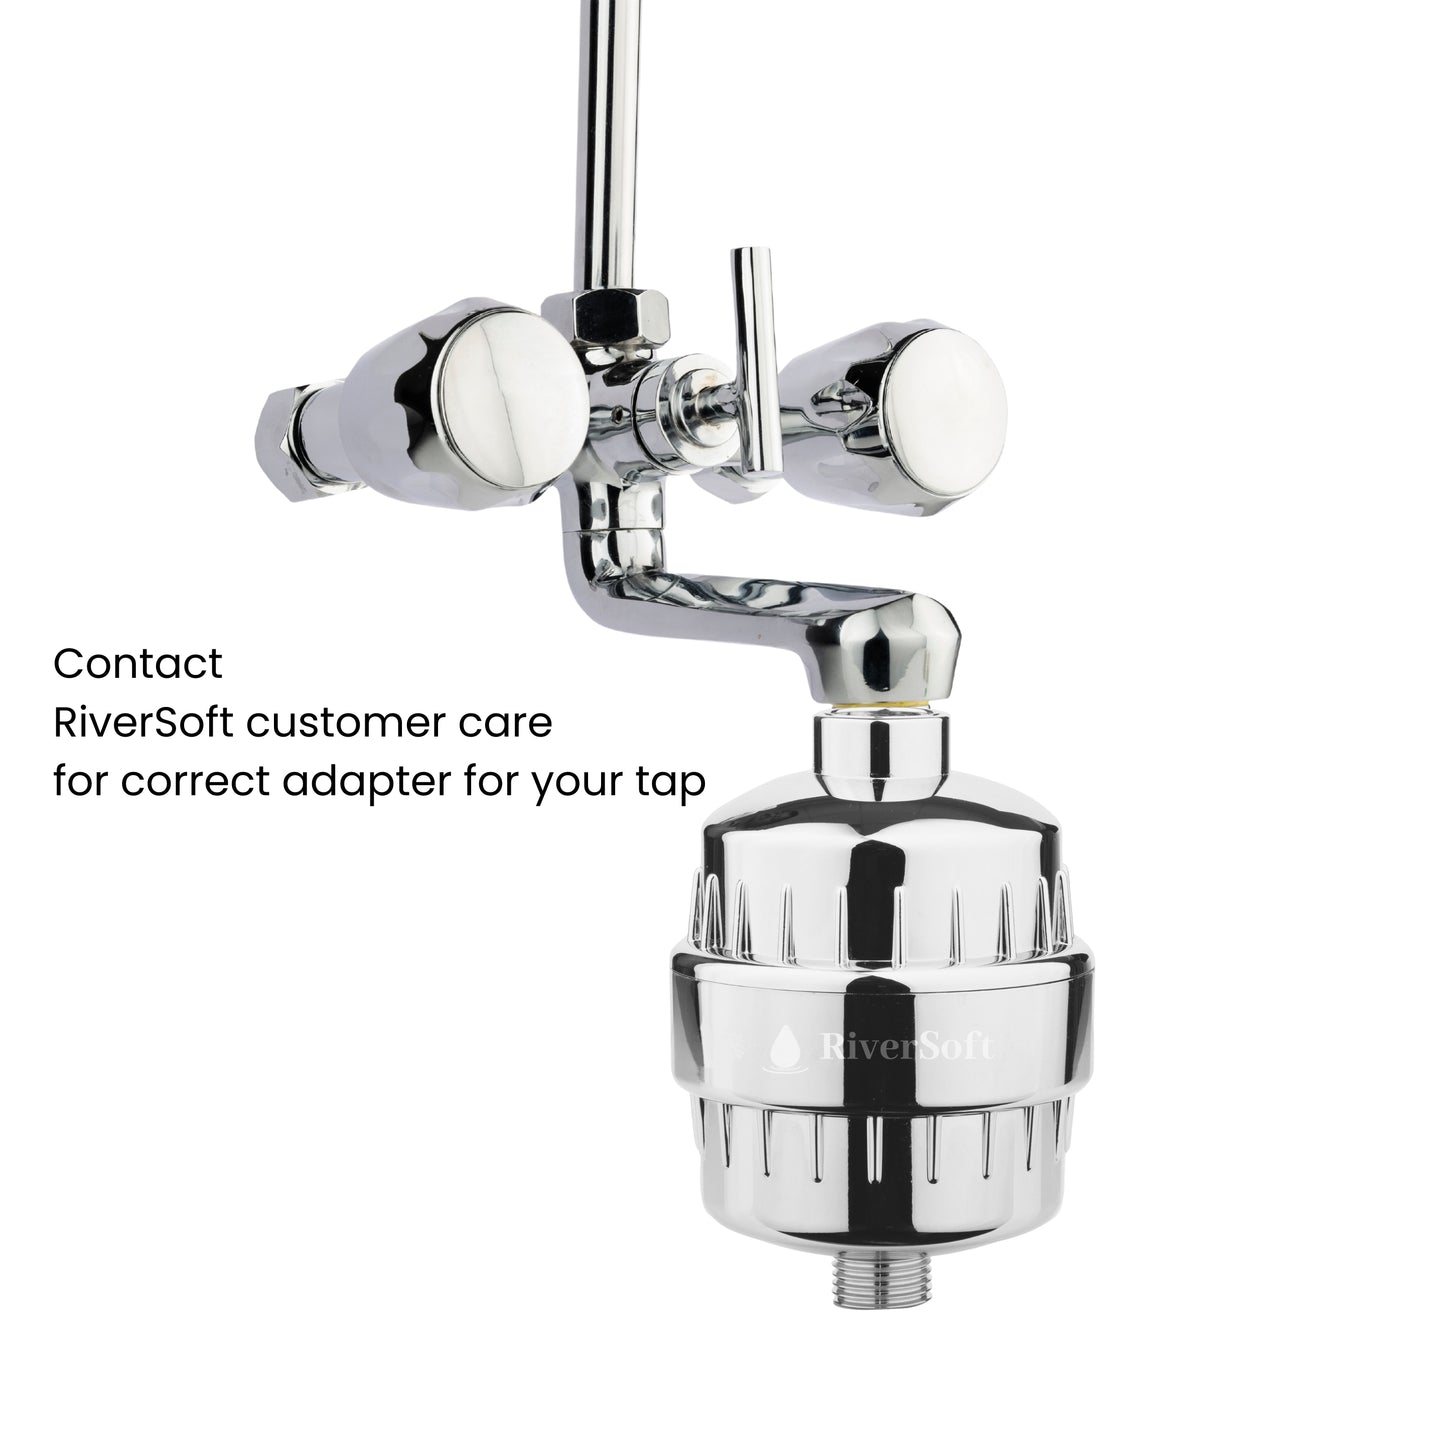 SF-15 PRO shower and tap filter for hard water | India's highest selling water softener